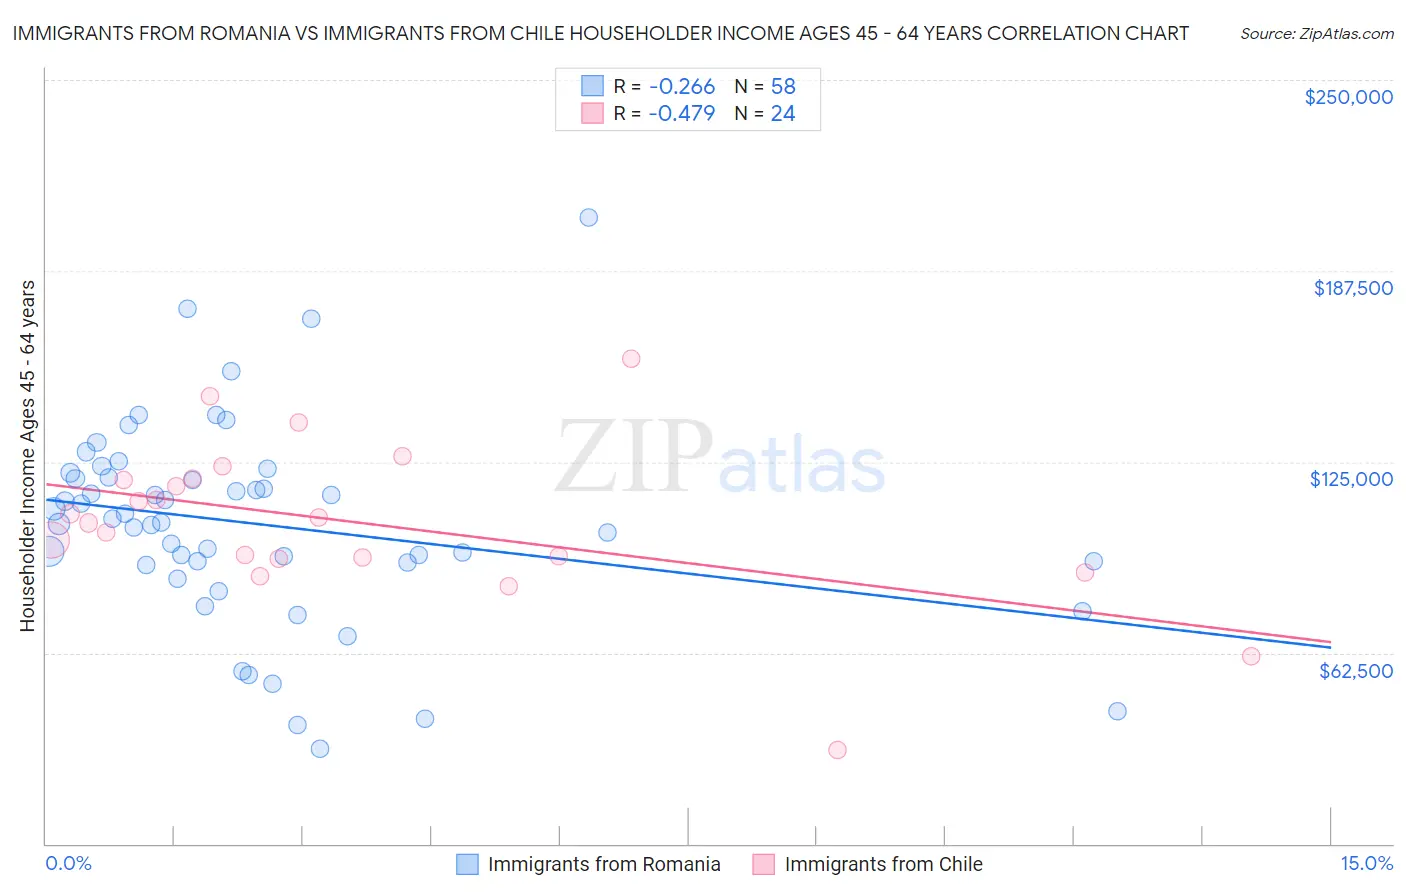 Immigrants from Romania vs Immigrants from Chile Householder Income Ages 45 - 64 years